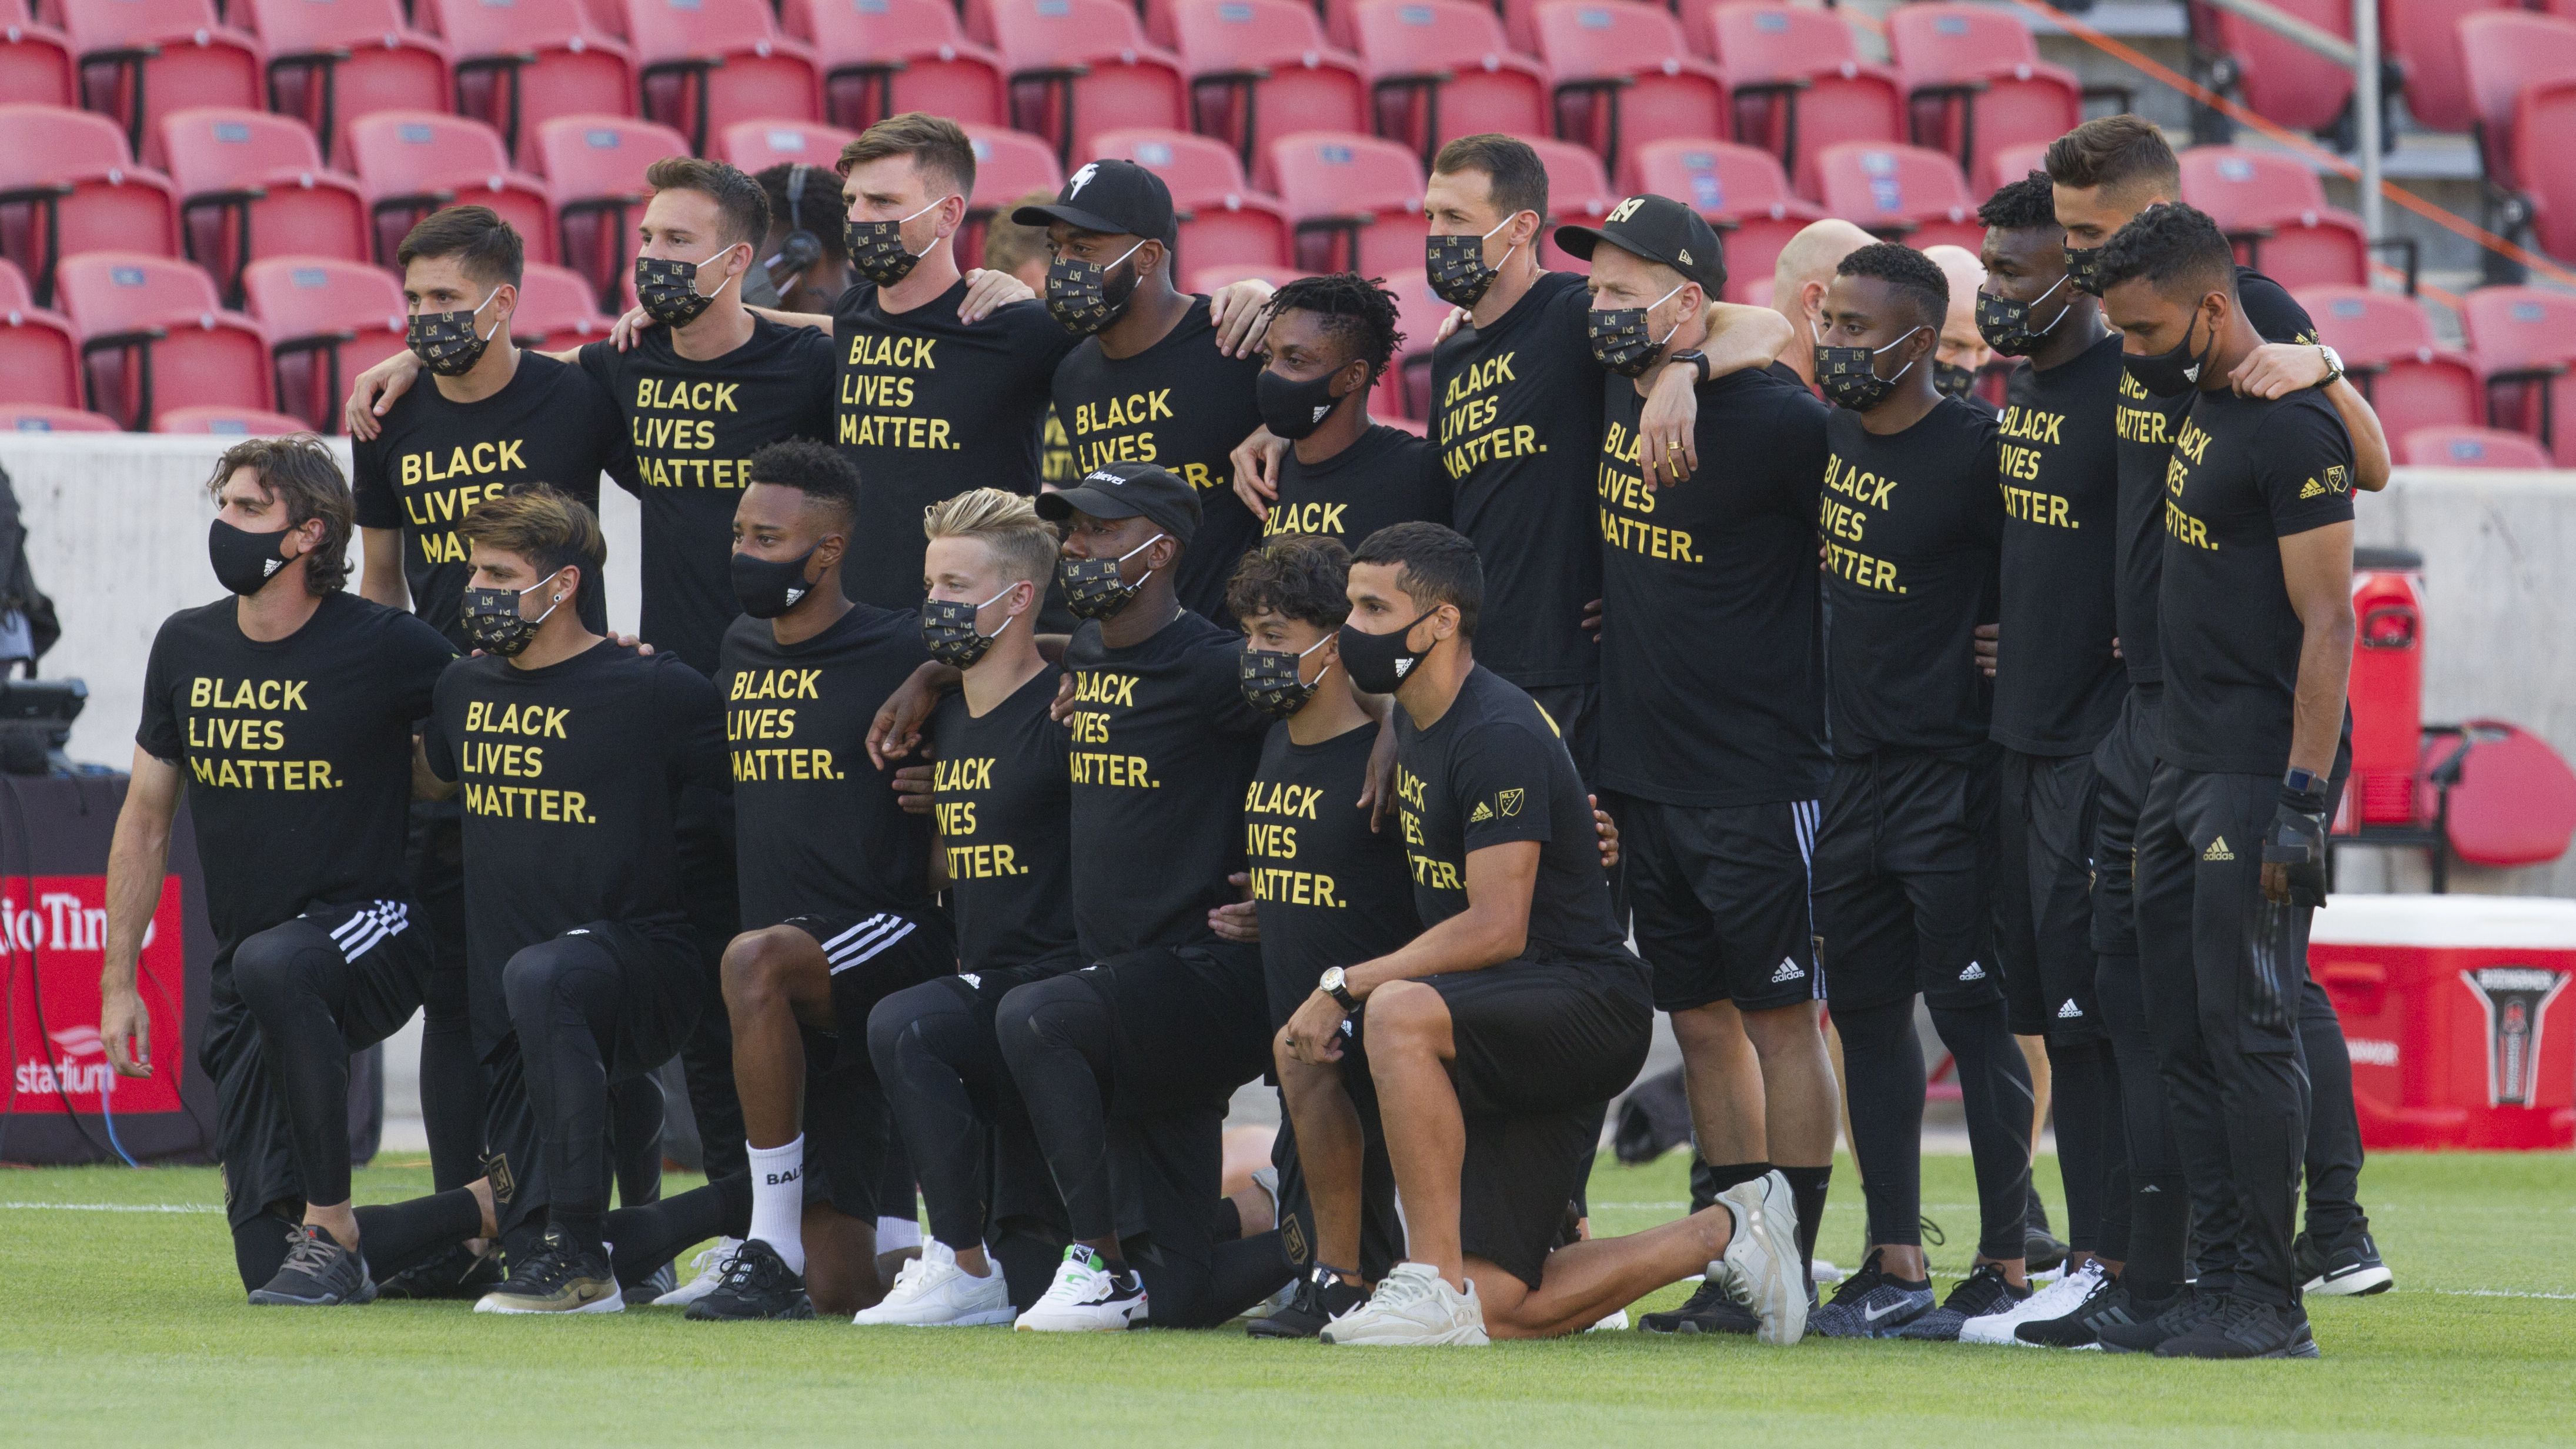 Members of the Los Angeles FC pose for a photograph on the field after their game against Real Salt Lake was postponed at Rio Tinto Stadium on August 26